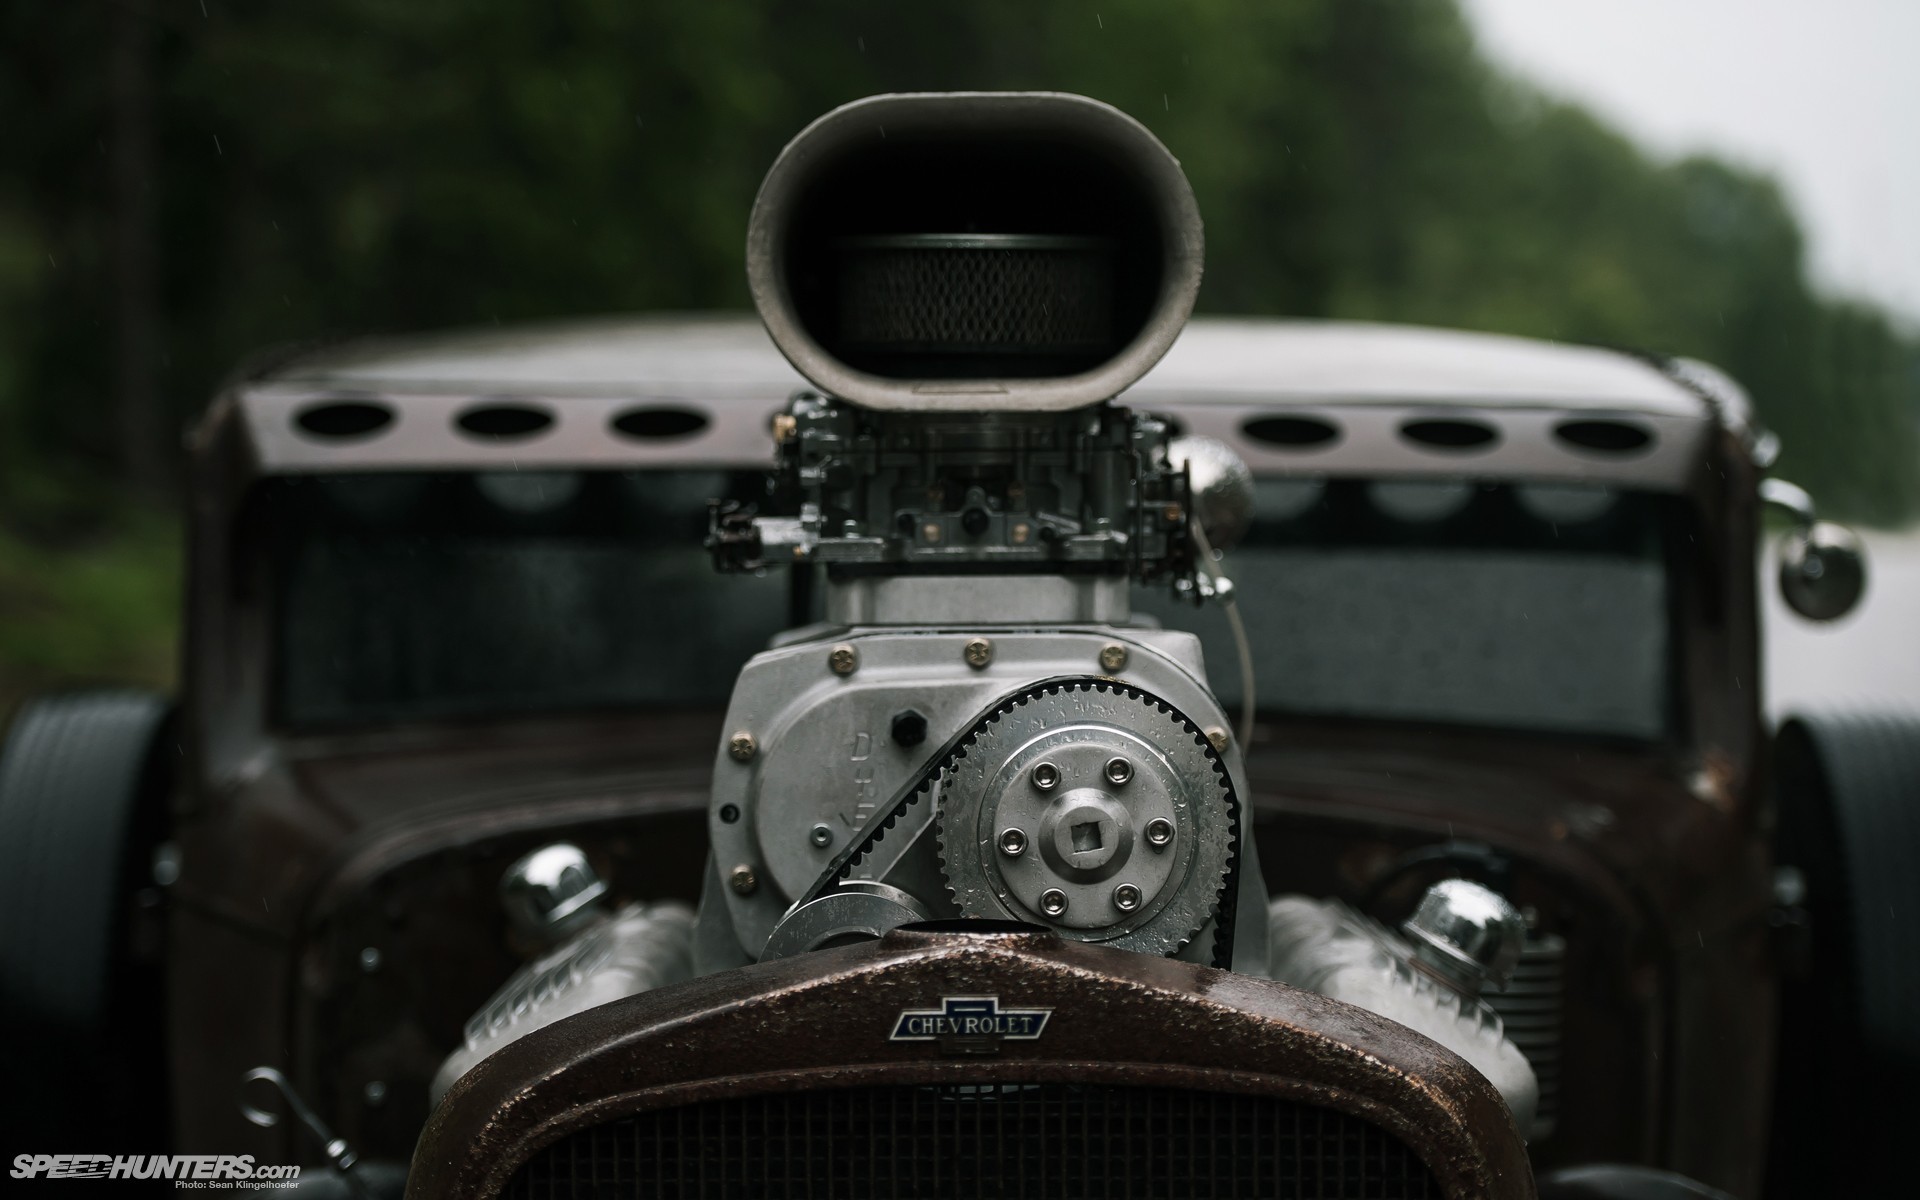 General 1920x1200 car Chevrolet Rat Rod old car engine vehicle oldtimers gears depth of field Hot Rod blurred blurry background classic car